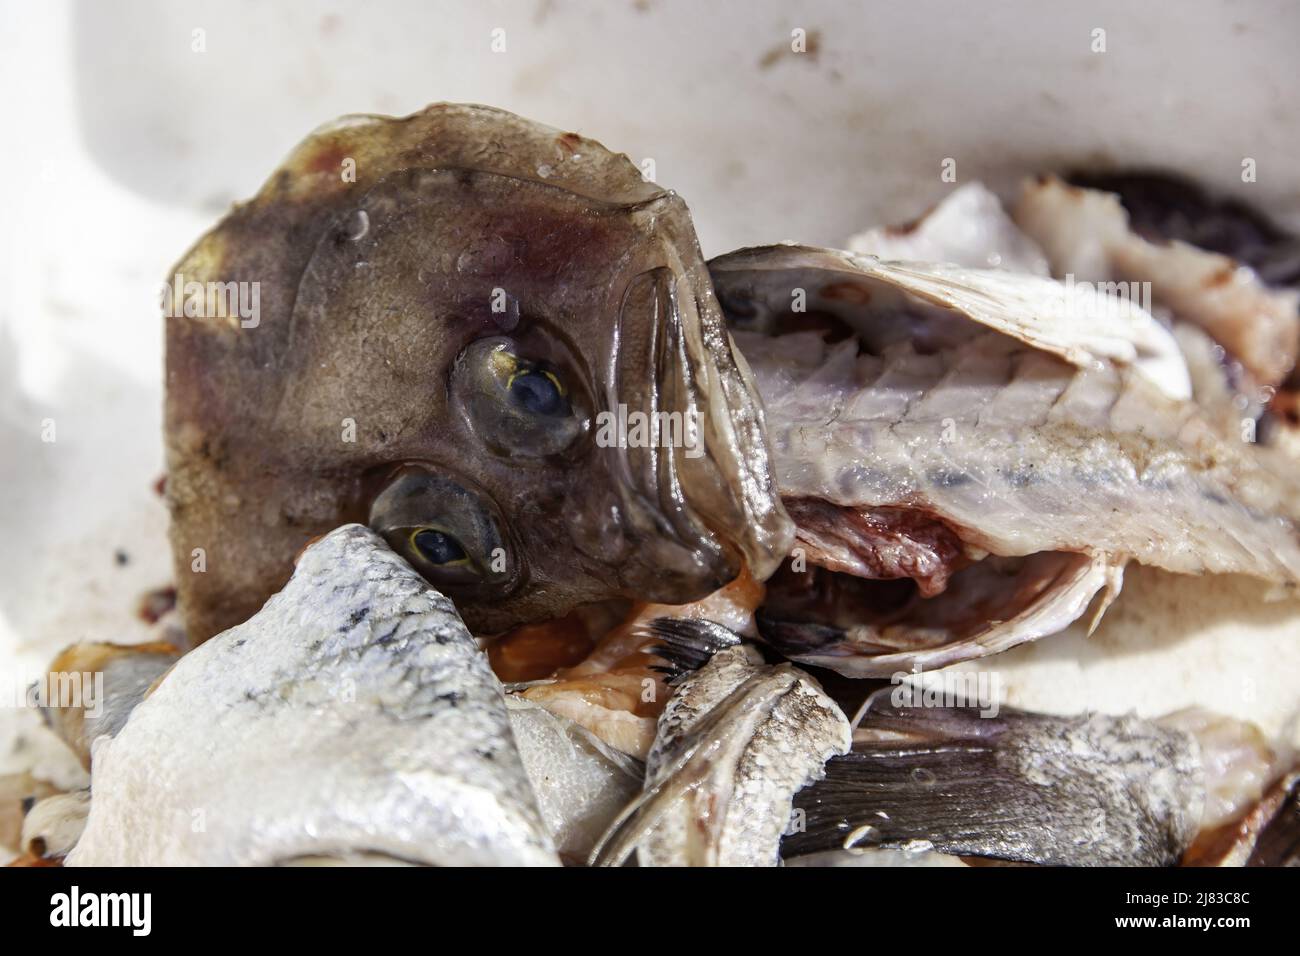 Box of bones and rotten fish, food and organic waste Stock Photo